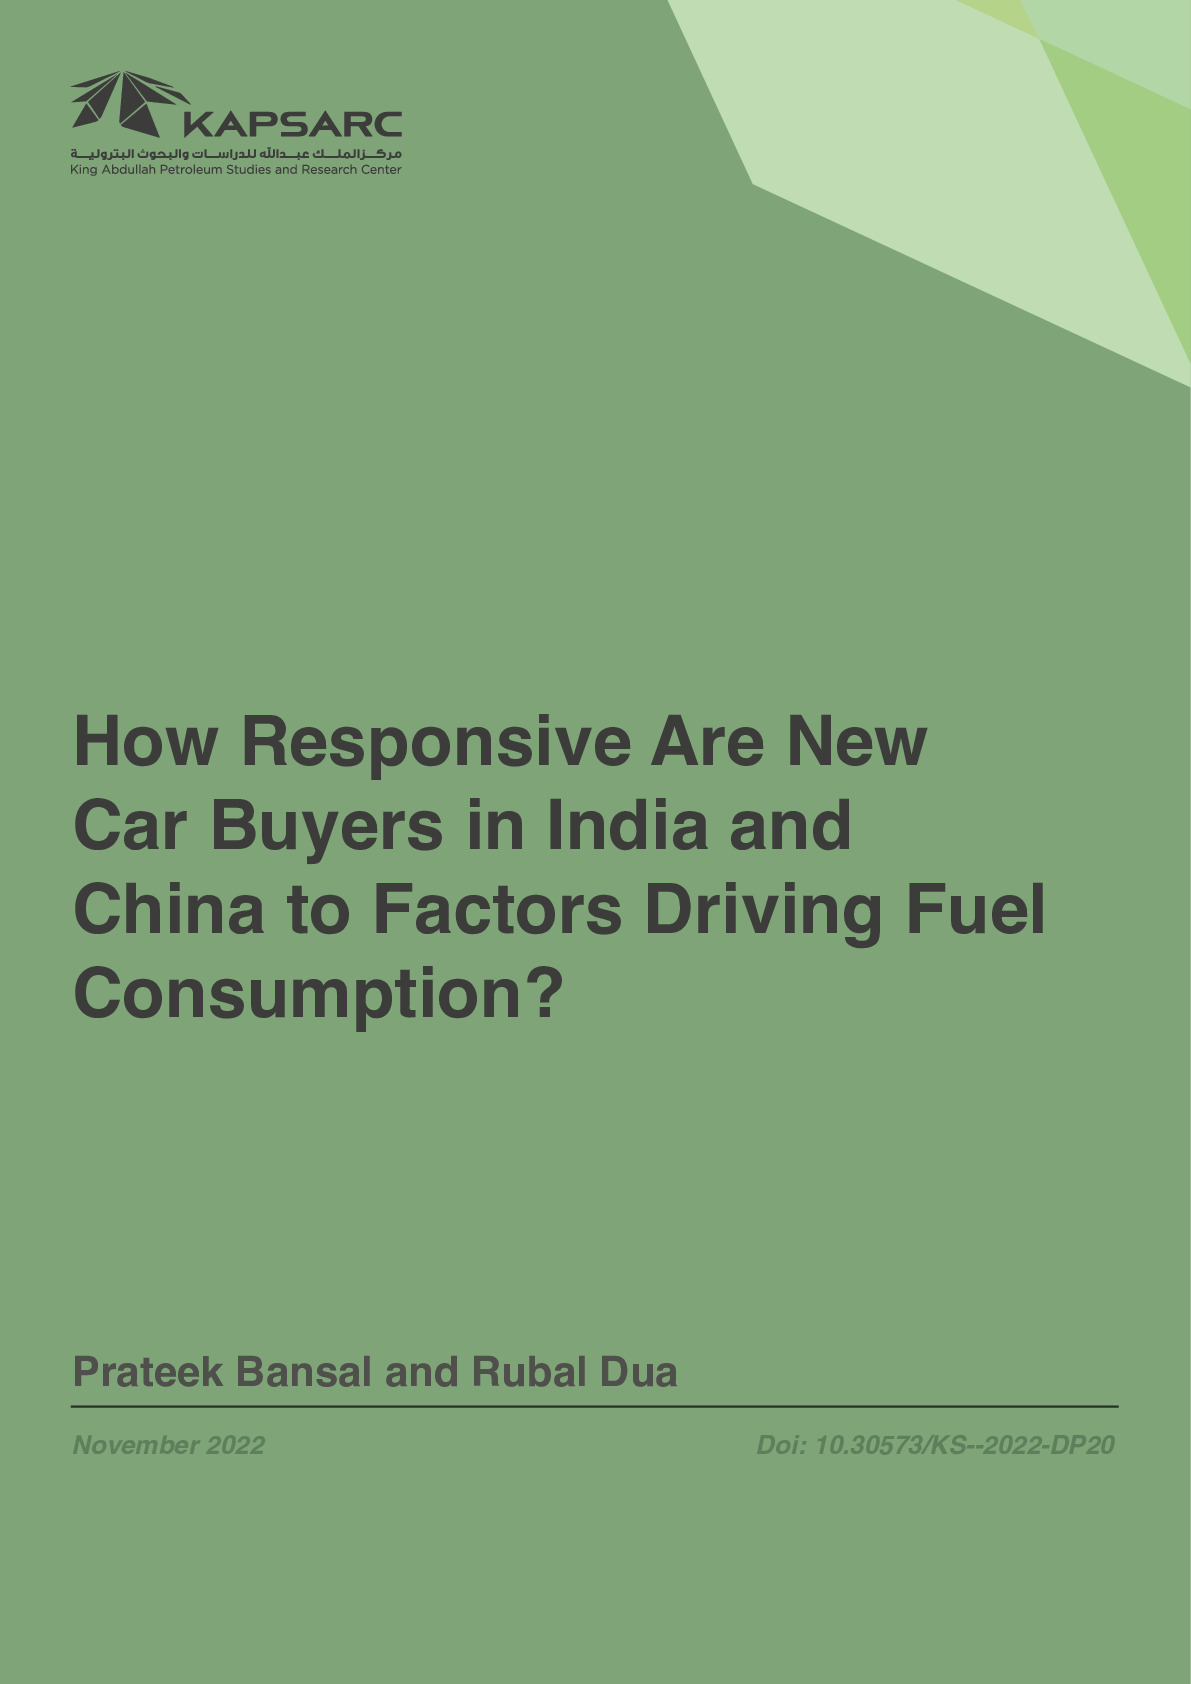 How Responsive Are New Car Buyers in India and China to Factors Driving Fuel Consumption?